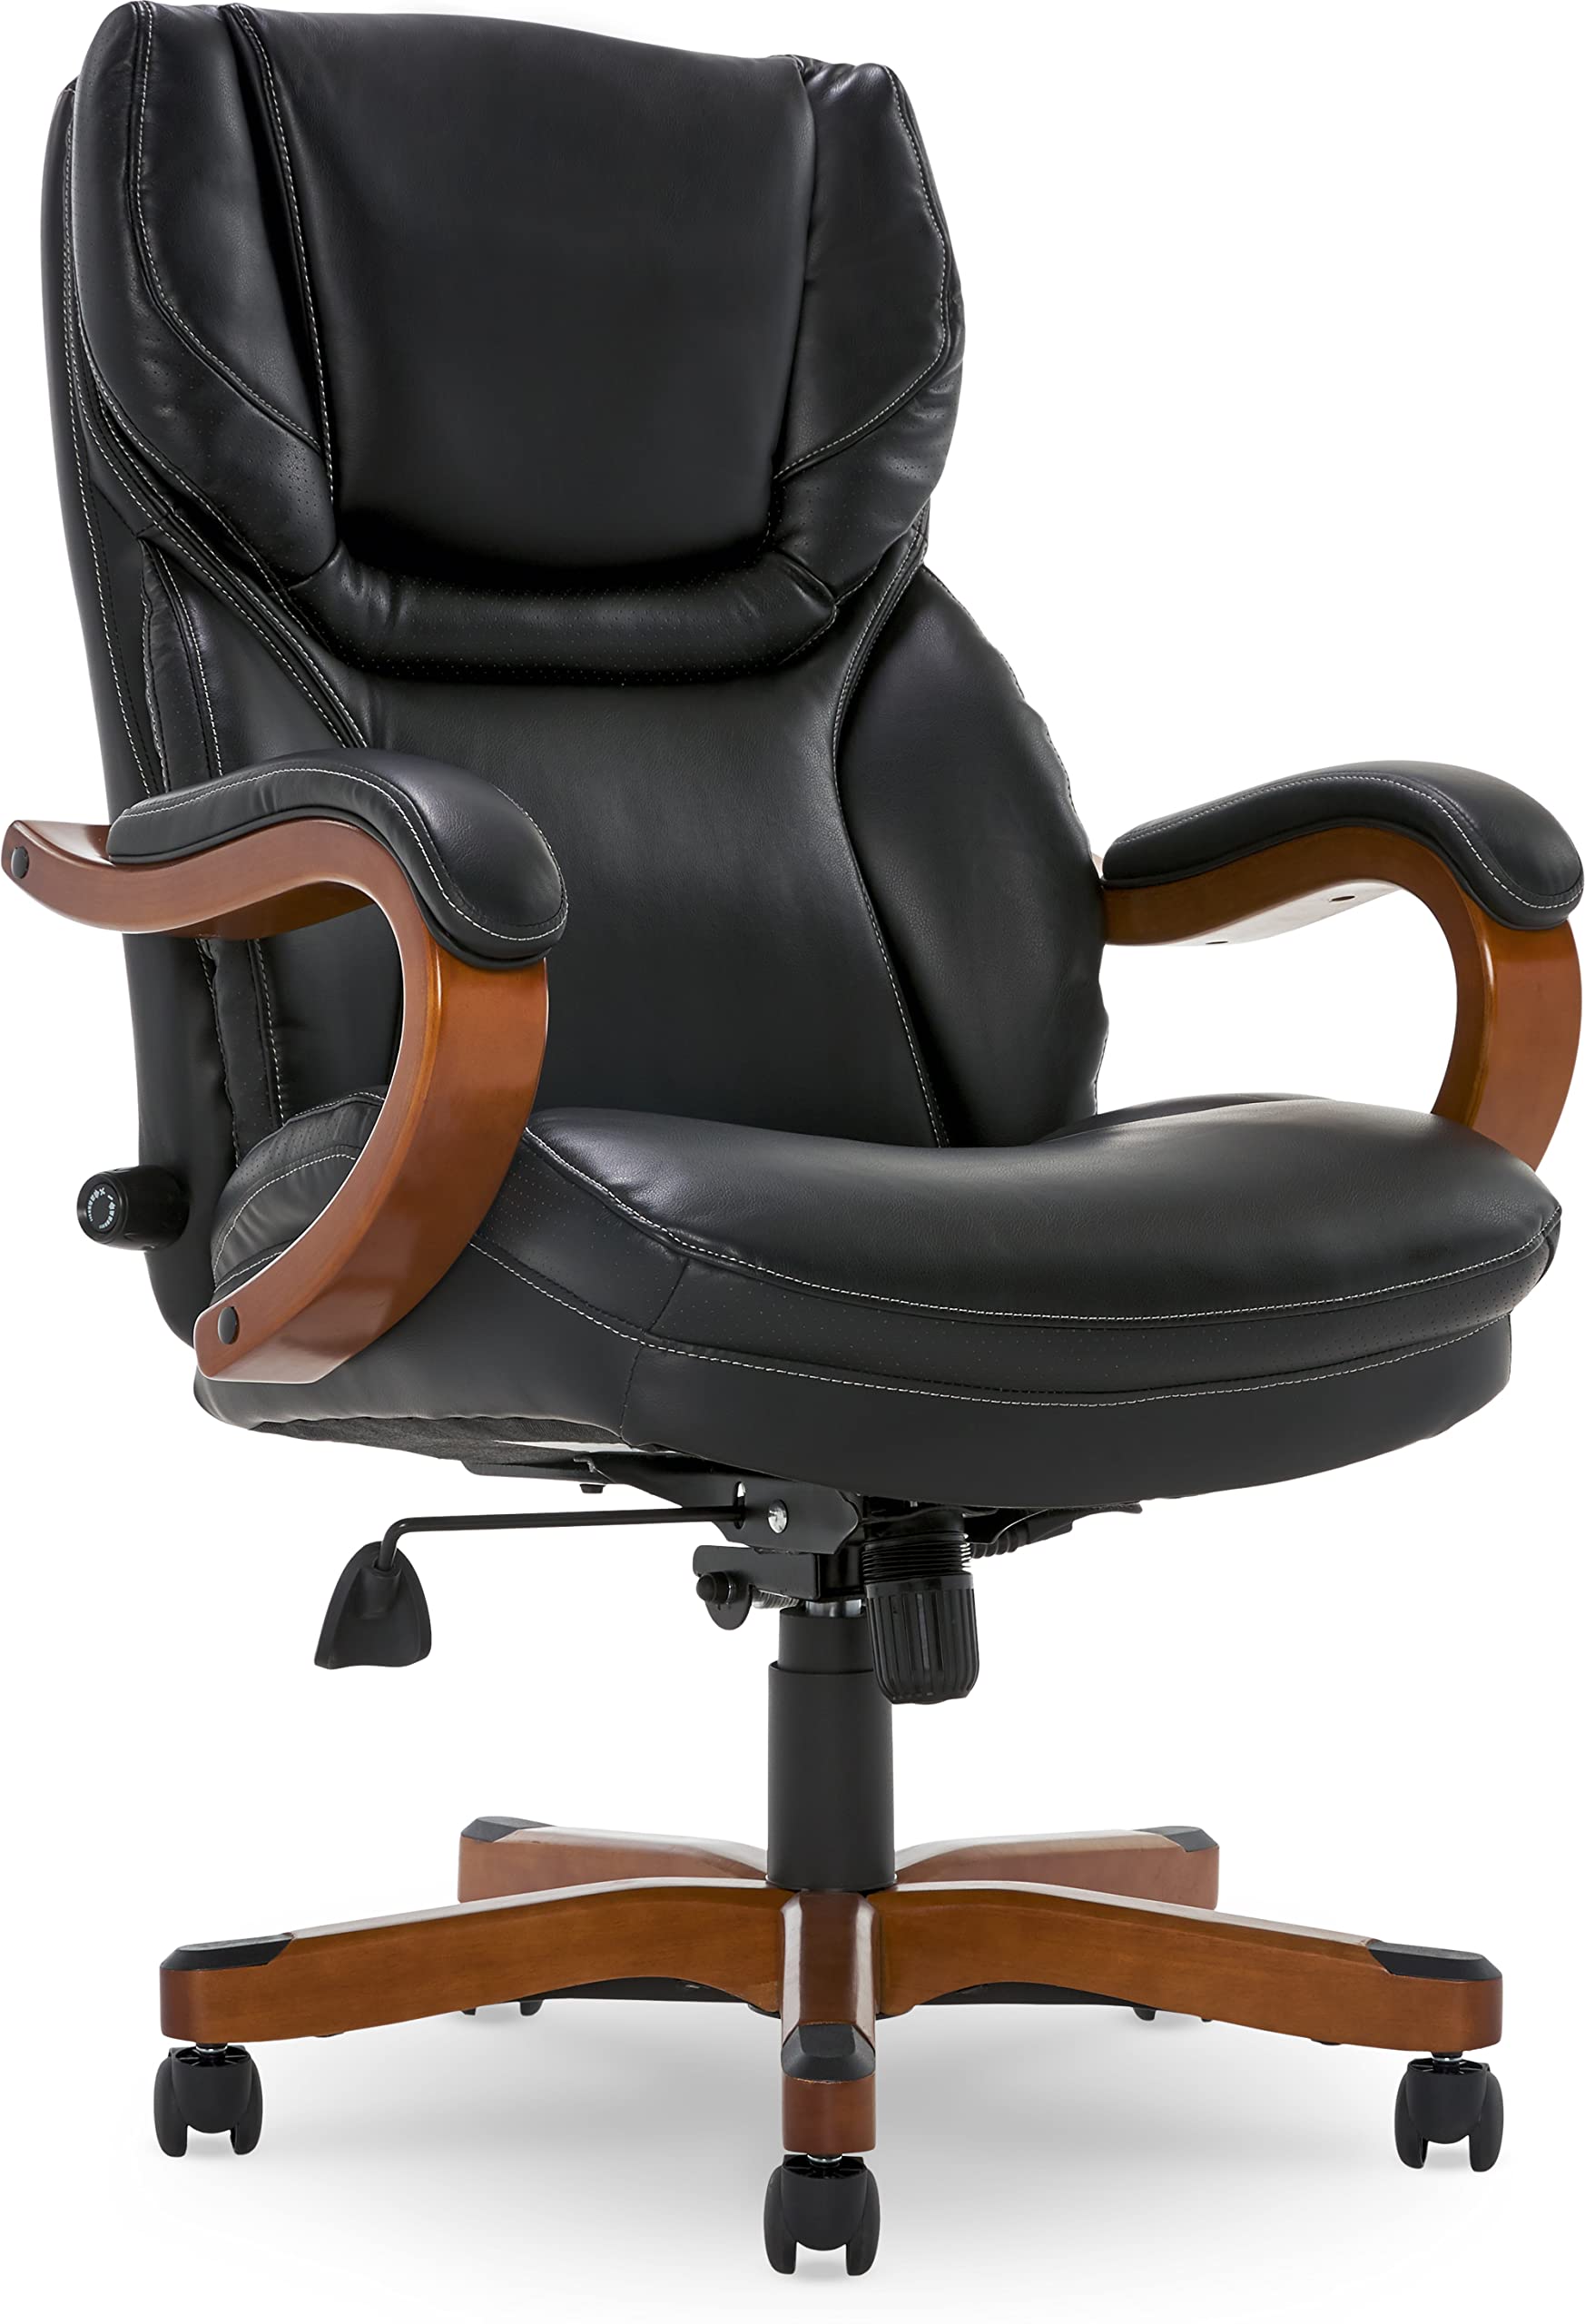 Serta Big and Tall Executive Office Chair with Wood Accents Adjustable High Back Ergonomic Lumbar Support, Bonded Leather